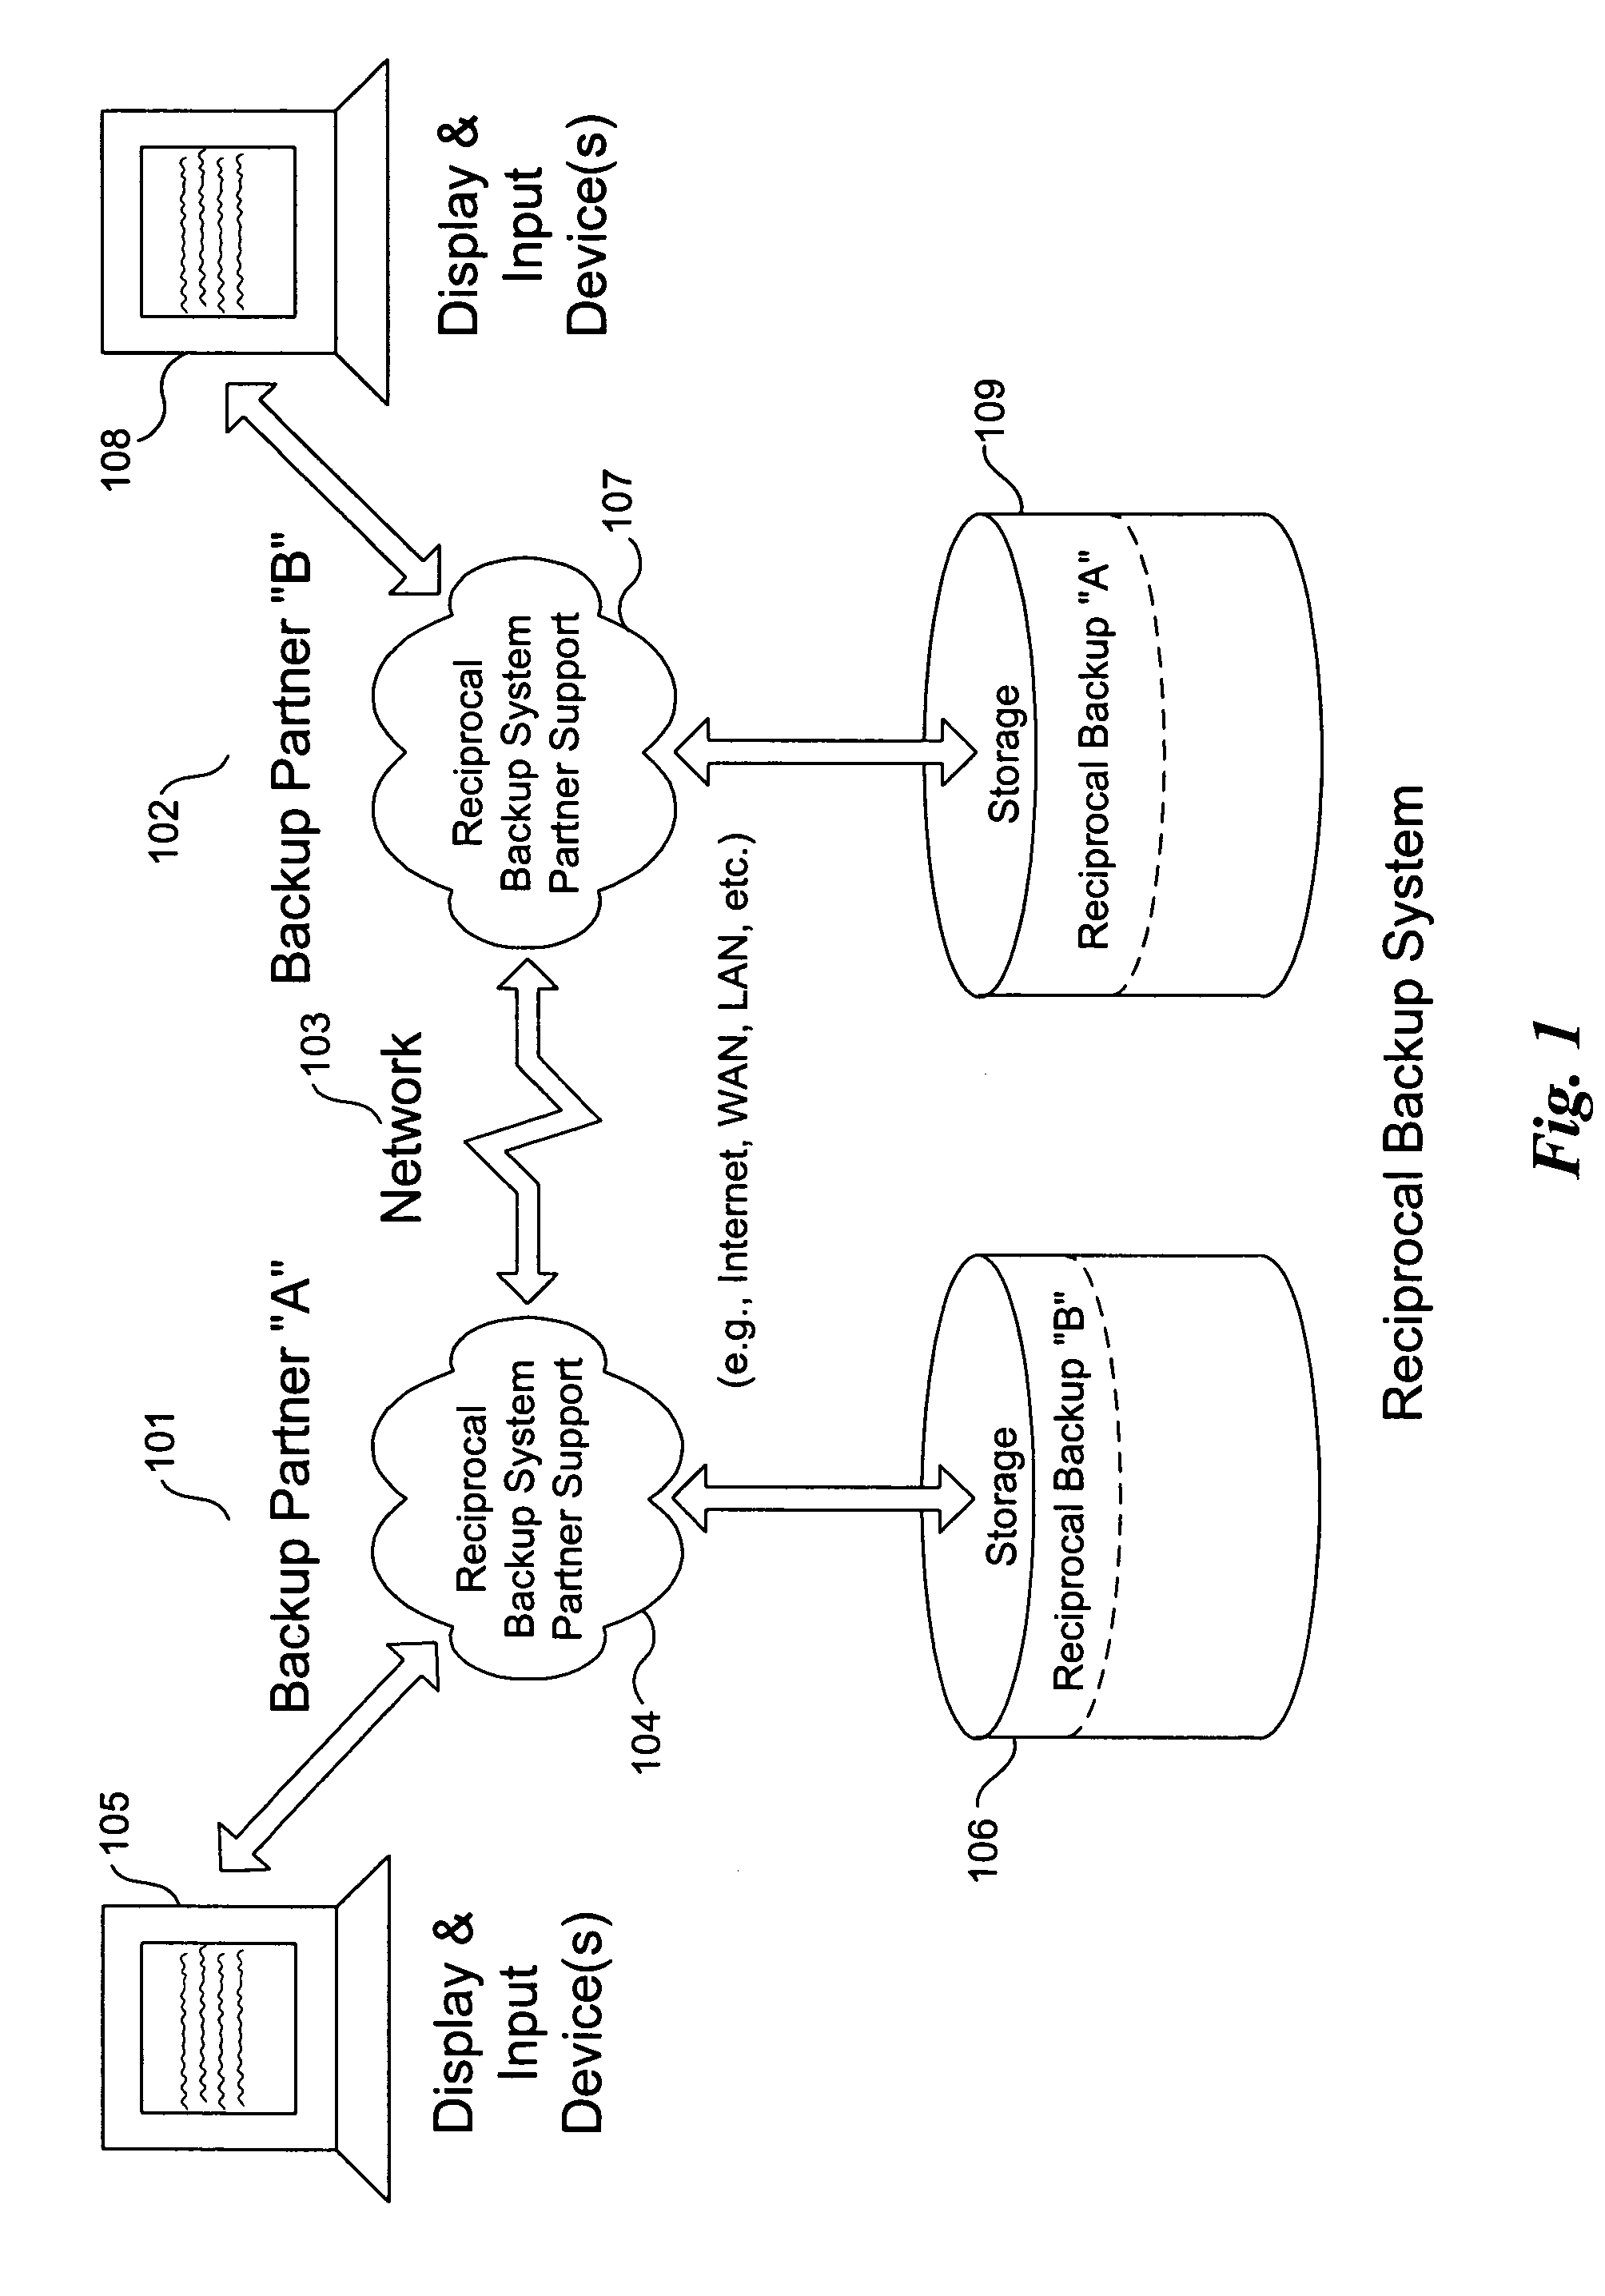 Method and system for reciprocal data backup